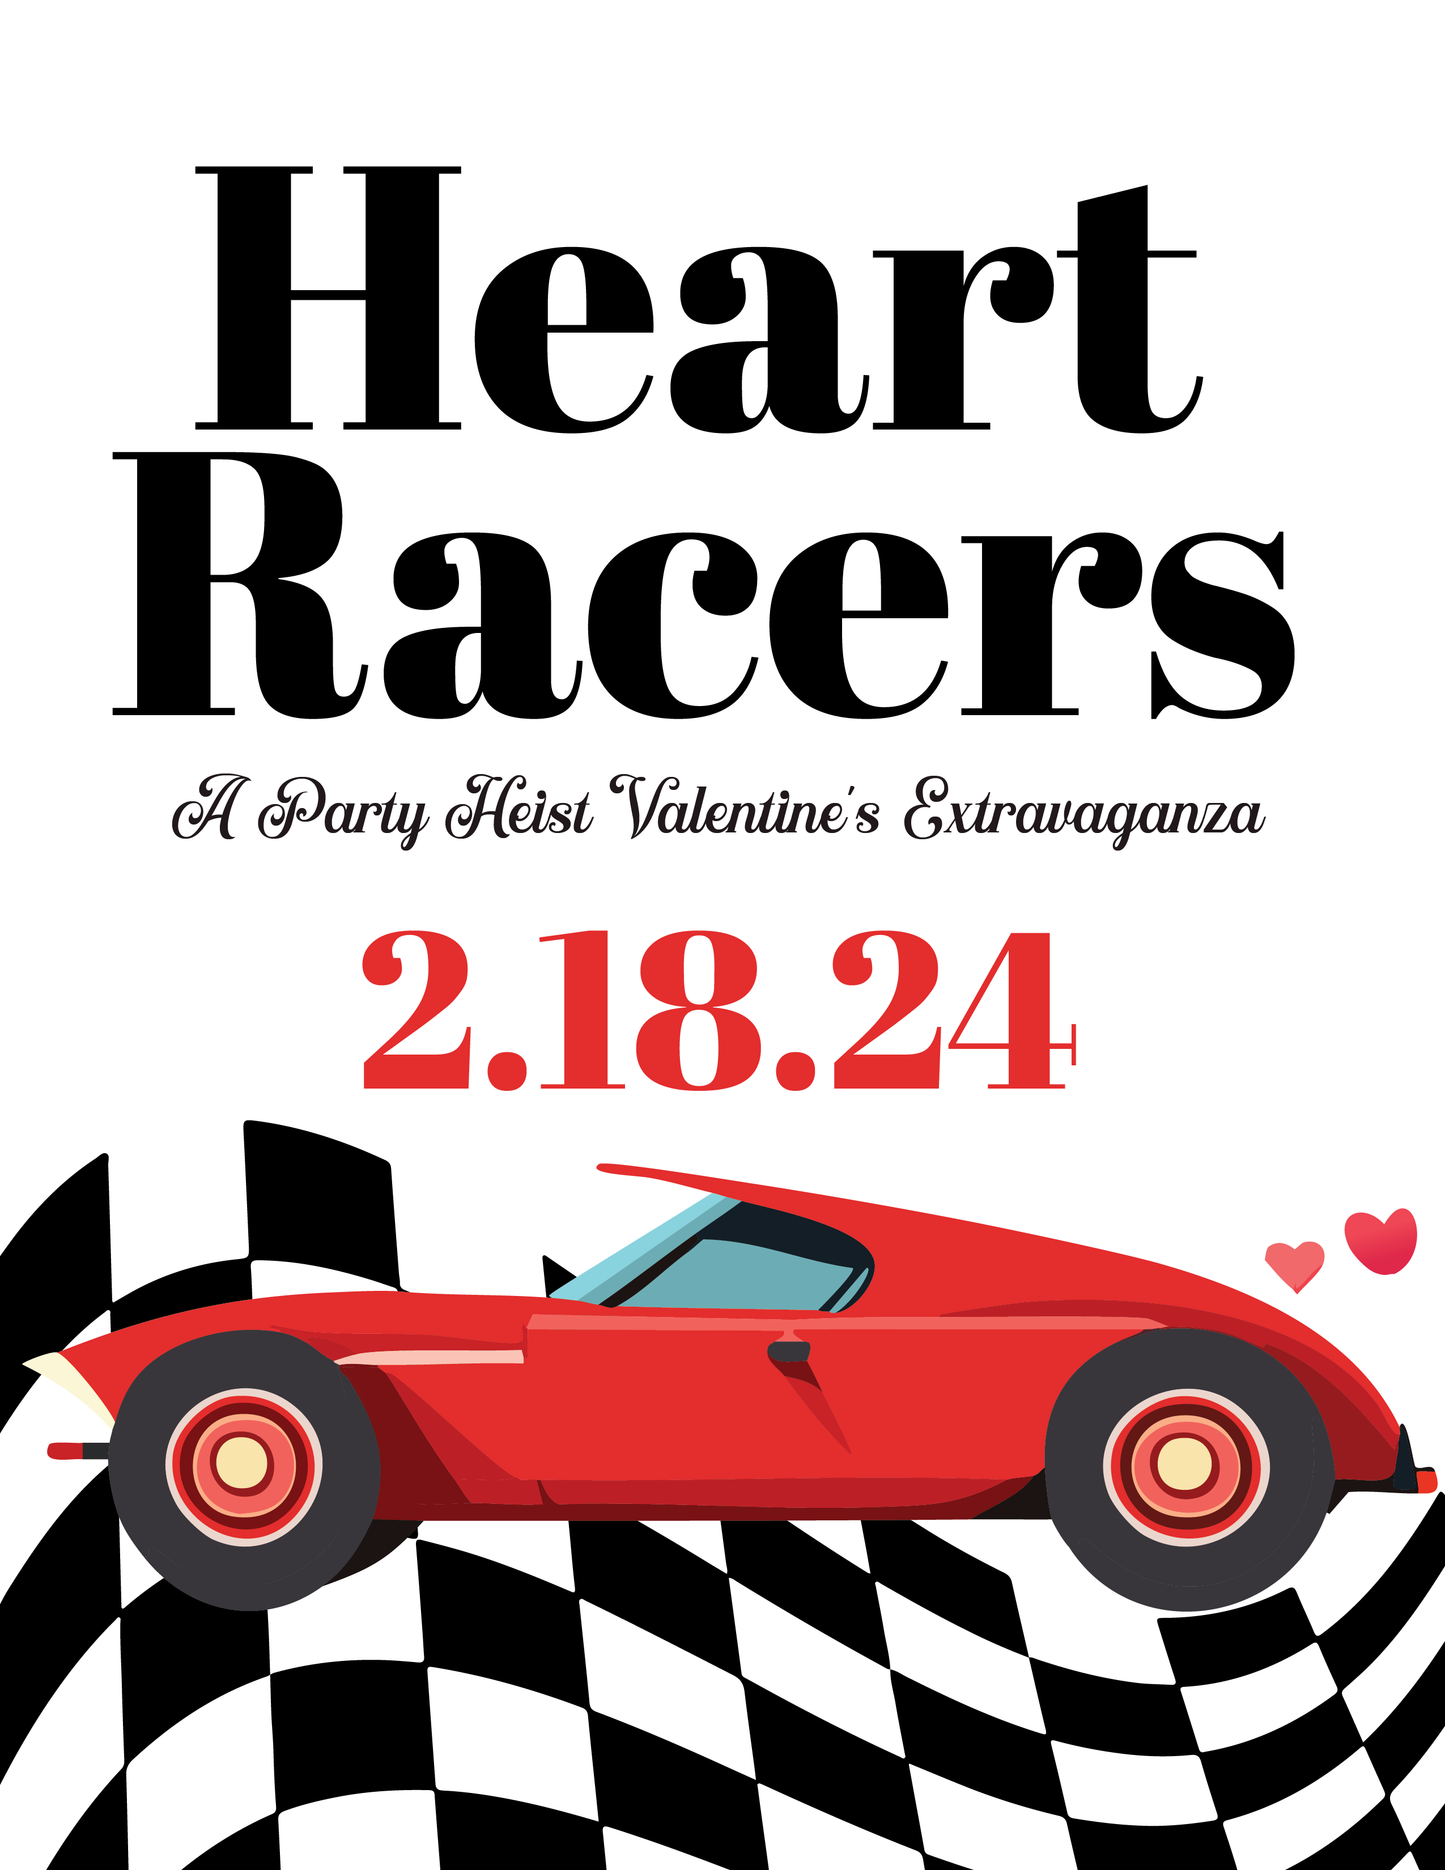 Heart Racers - A Party Heist Valentine's Extravaganza